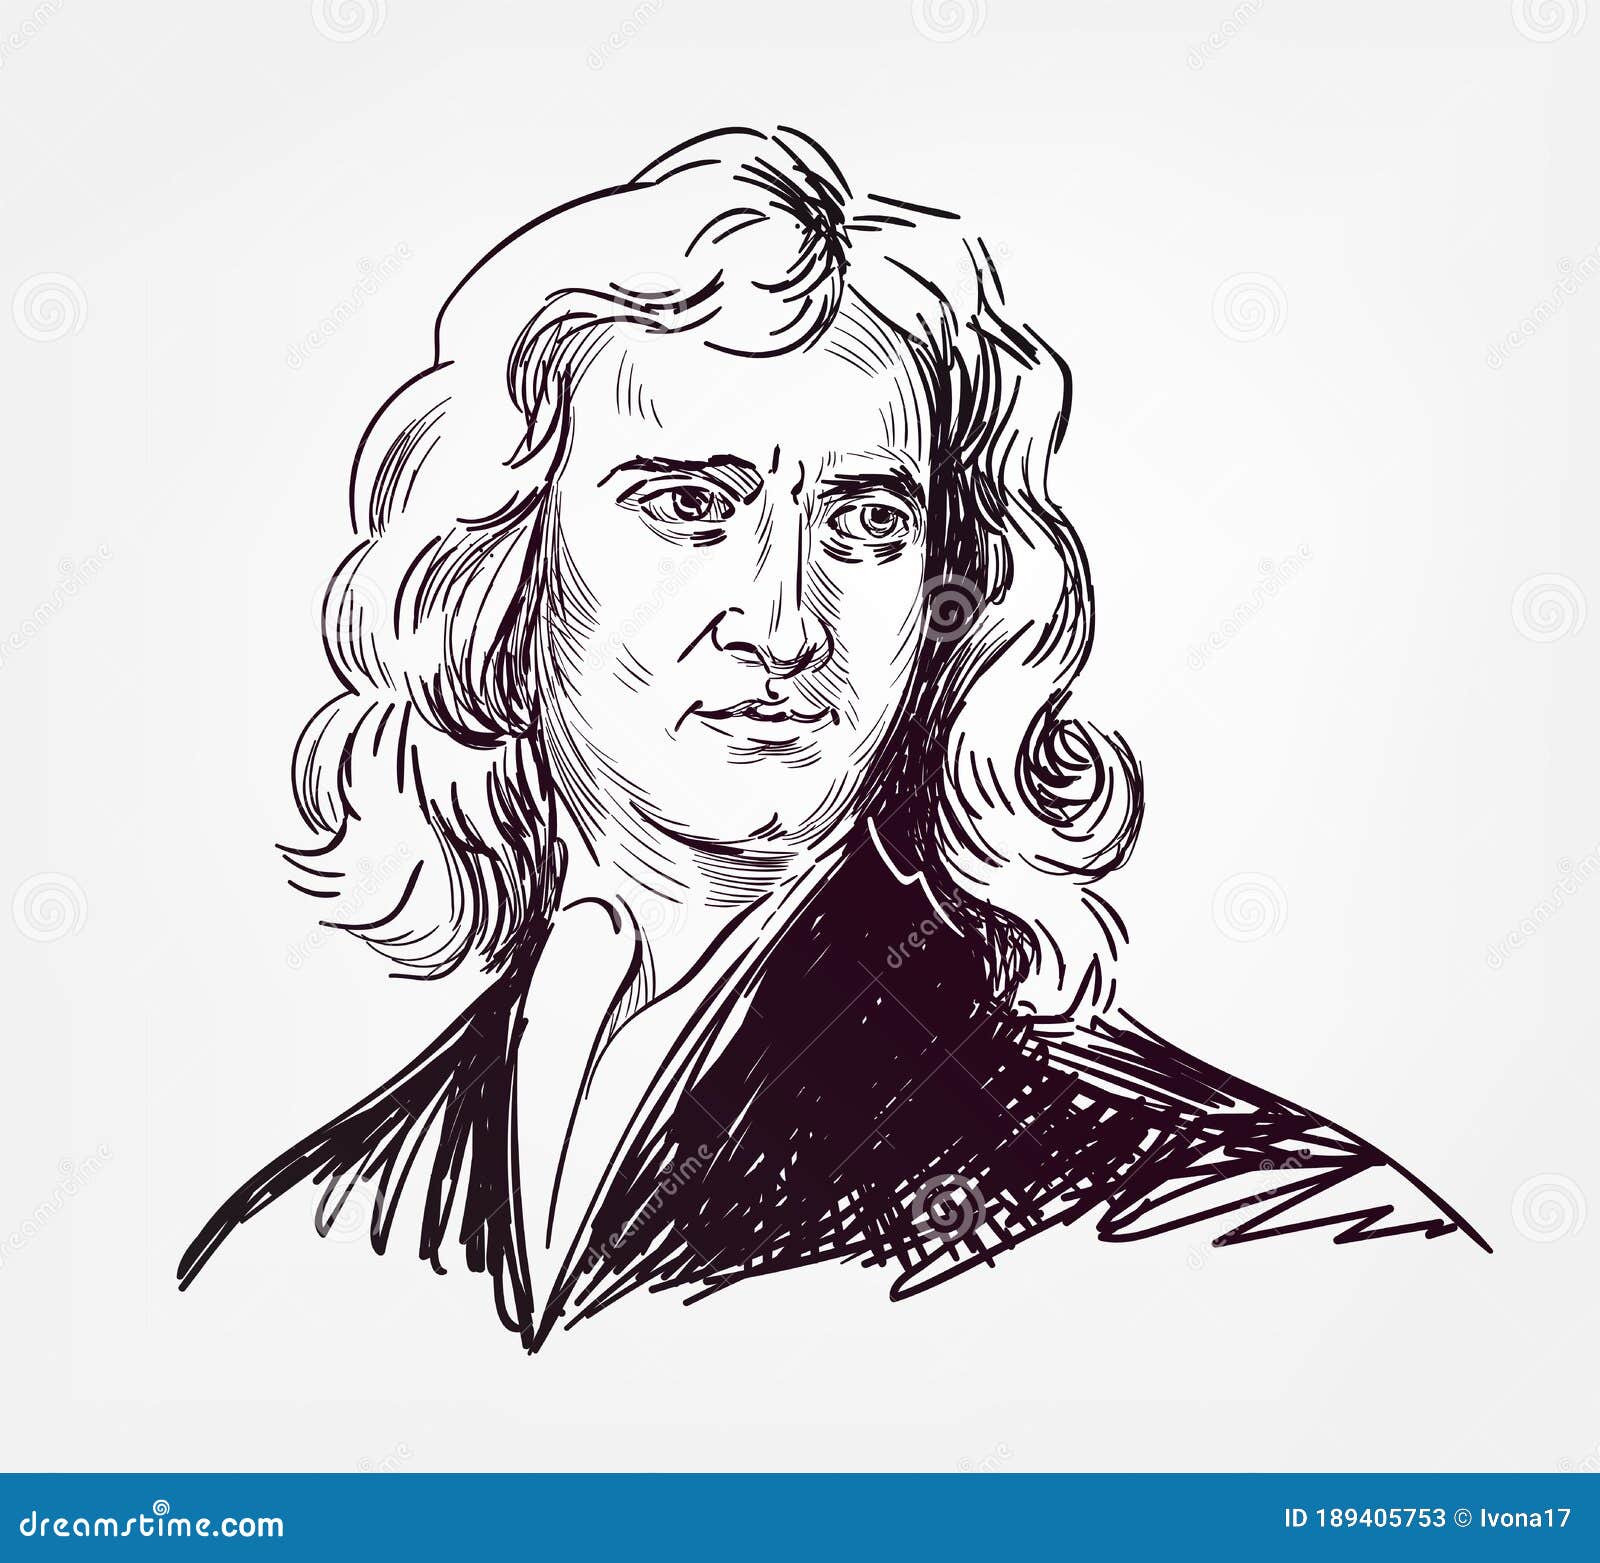 Sir Isaac Newton drawing easy  How to draw Newton drawing step by step   Outline drawings  arts  YouTube